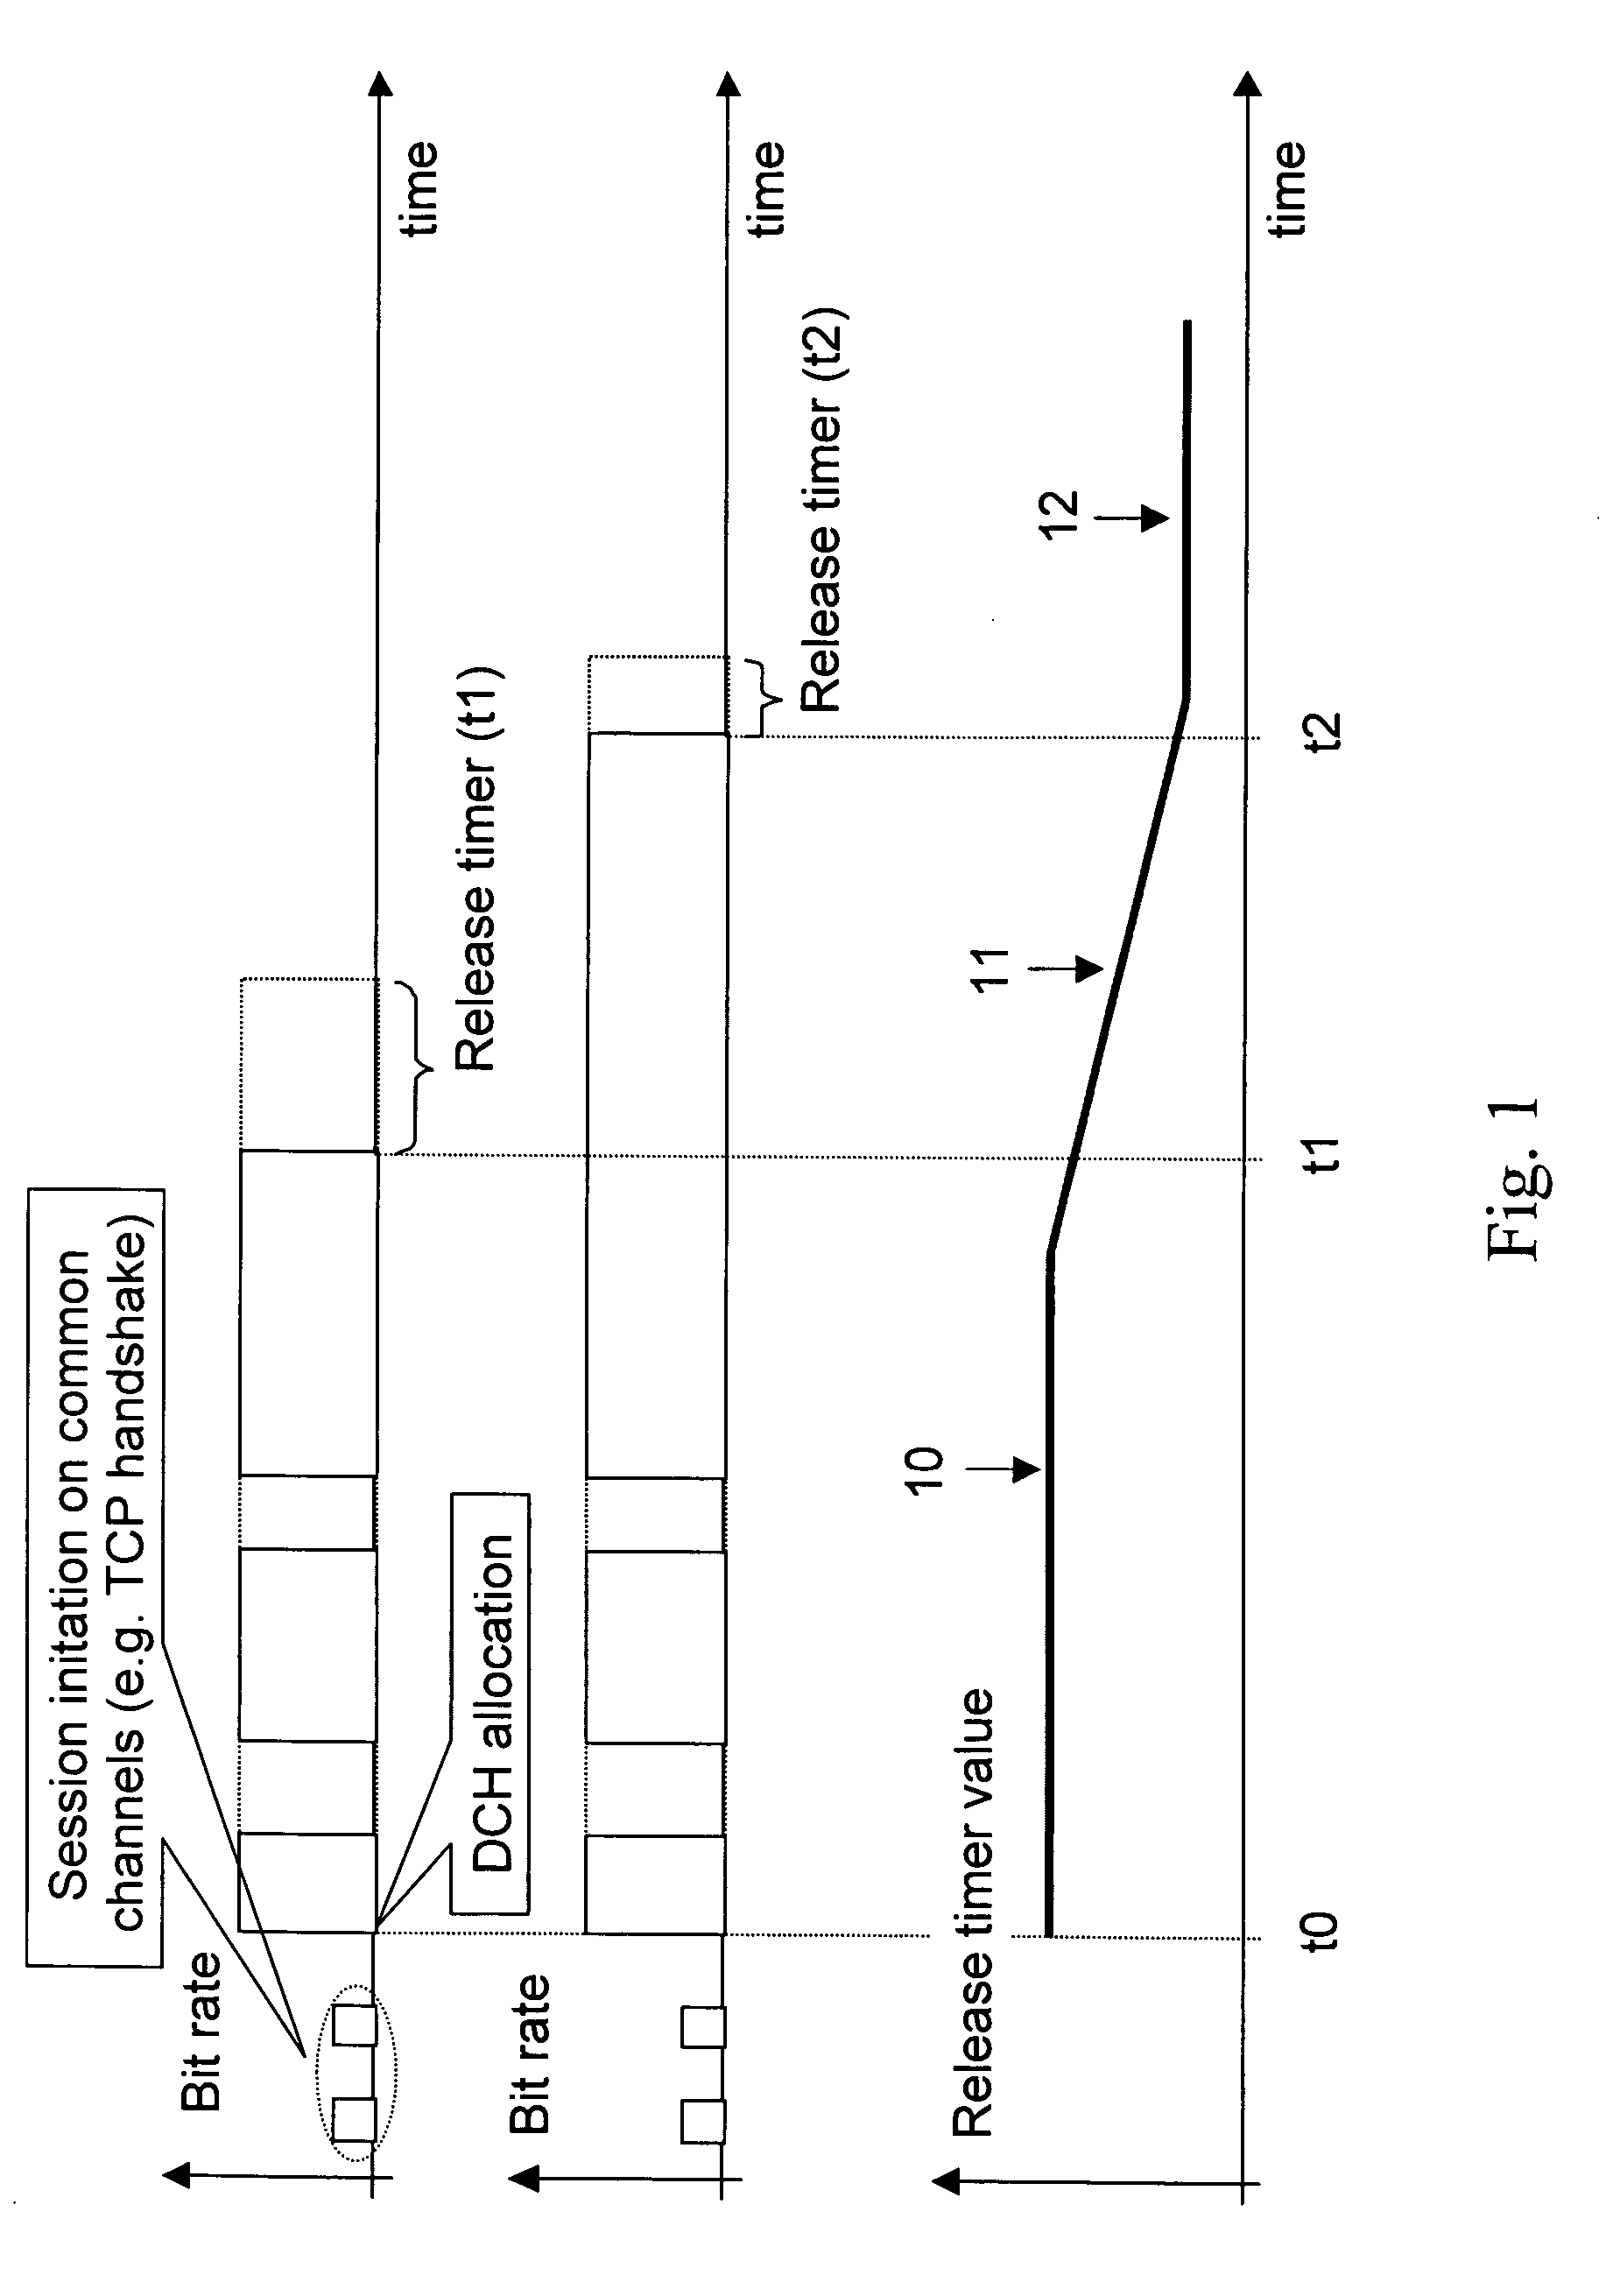 Release timer for NRT connection in mobile communication network